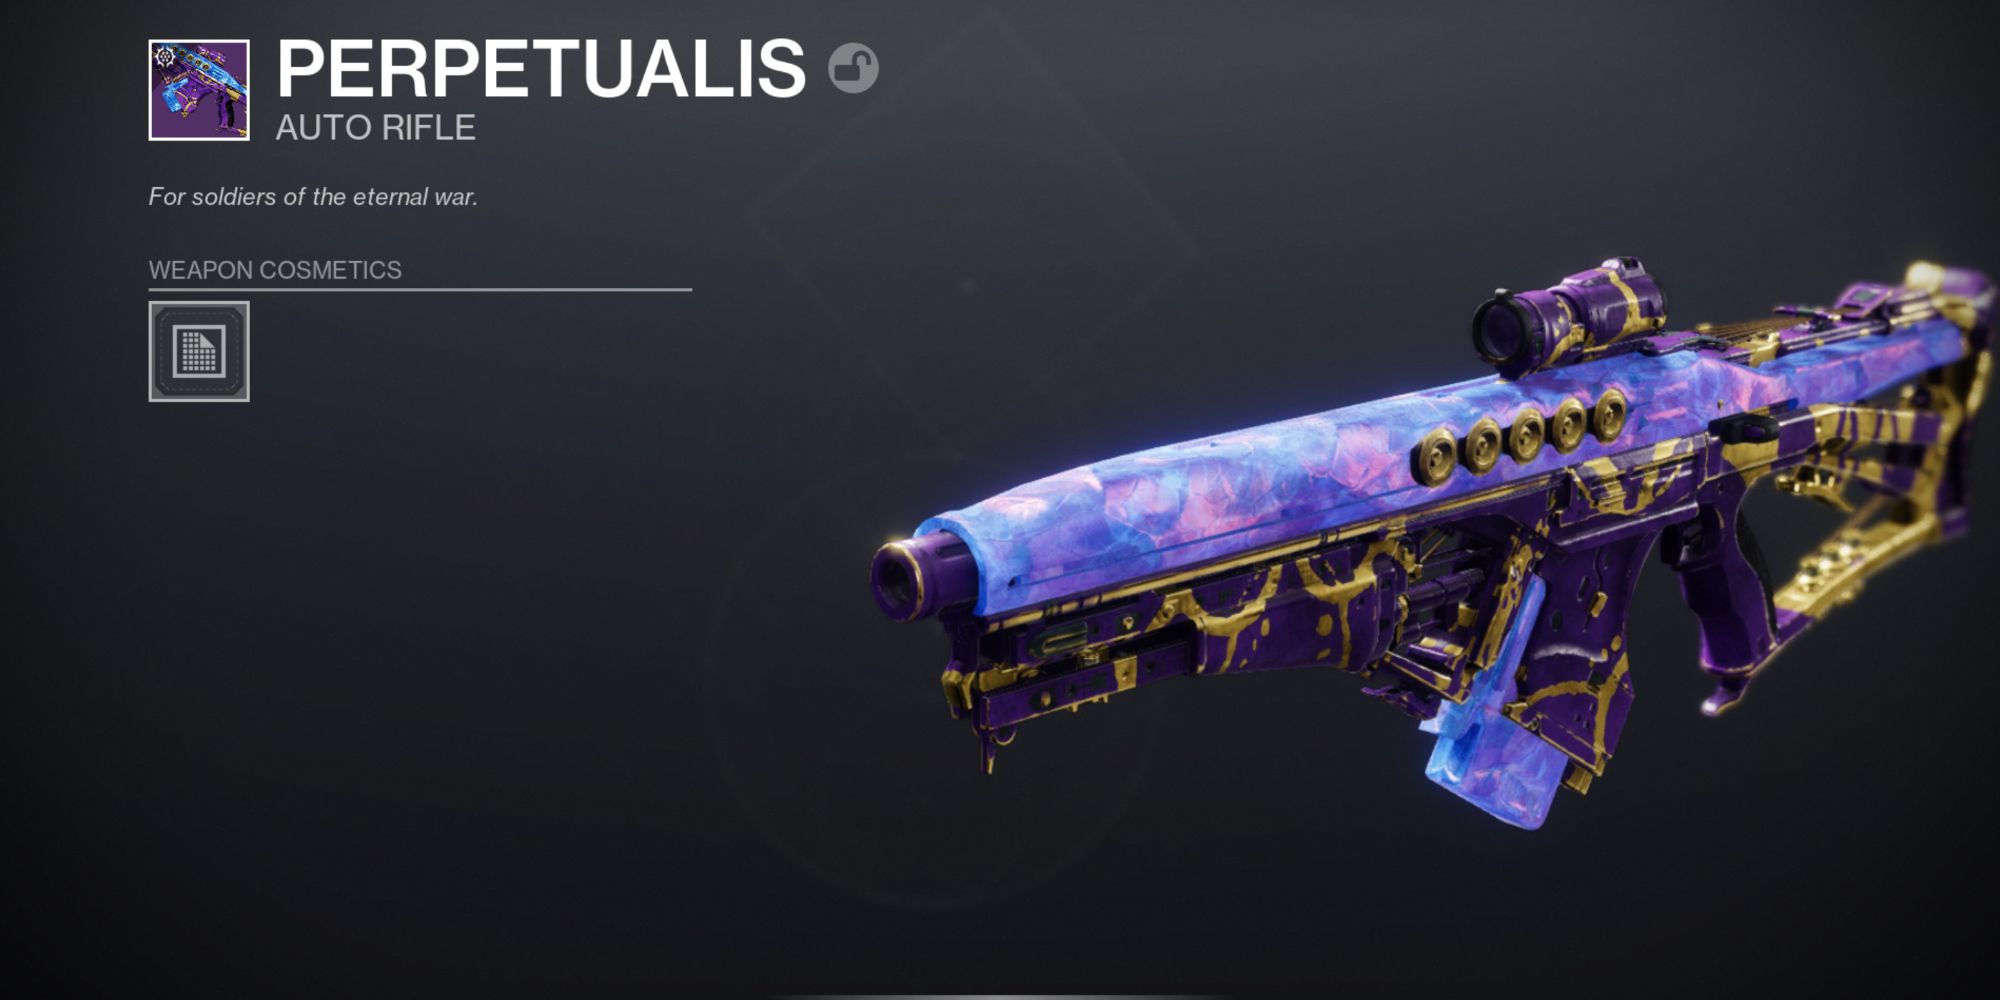 Destiny 2: A purple and gold patterned auto rifle